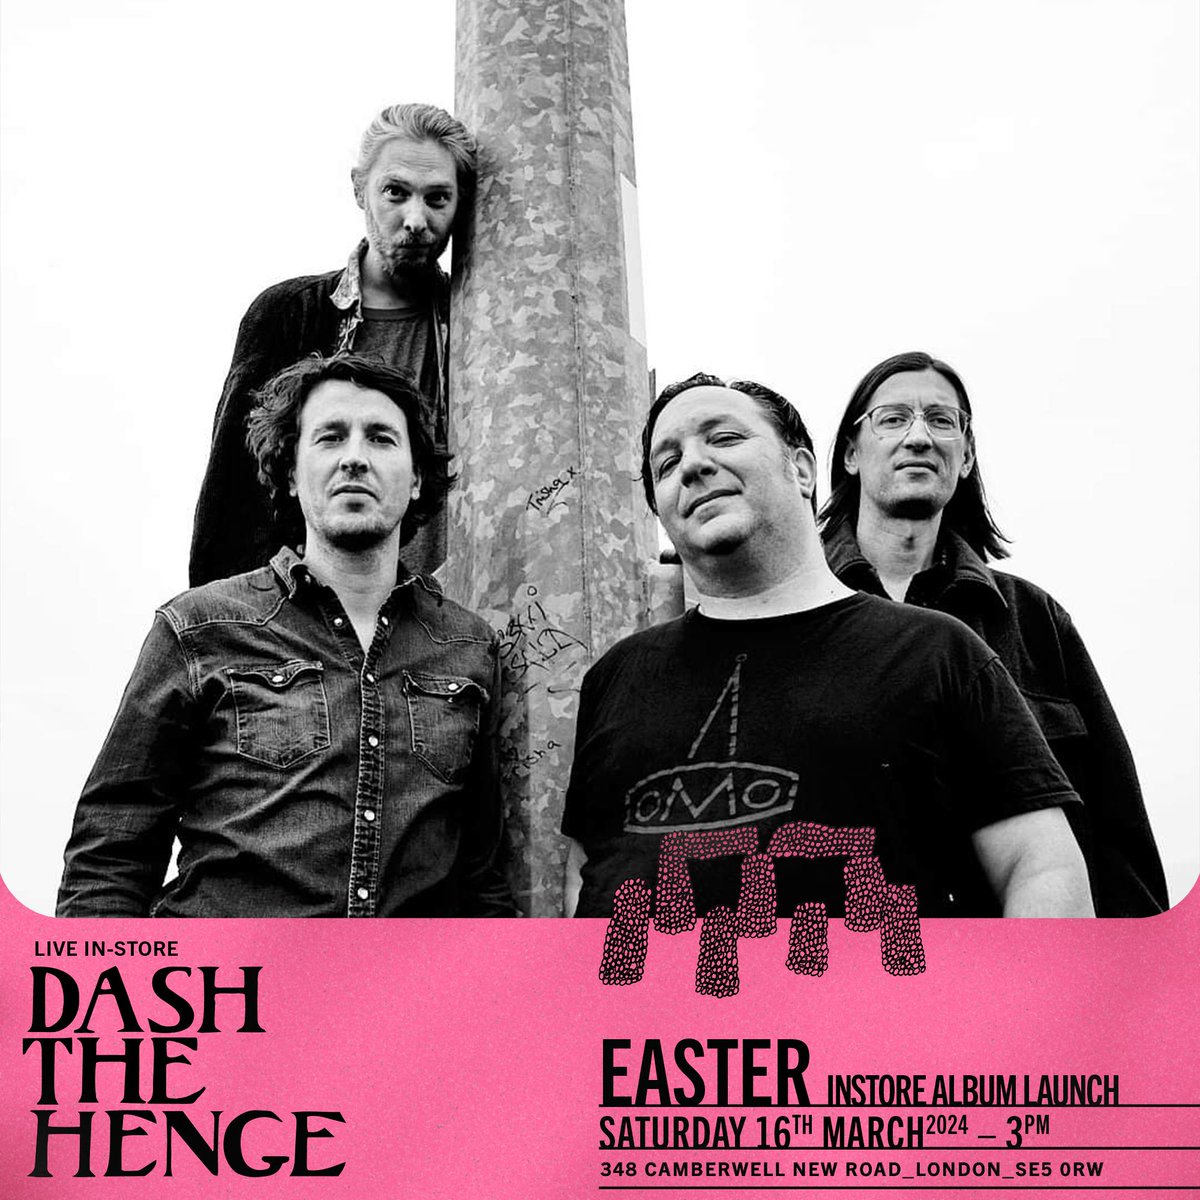 instore alert! 3pm today @DashTheHenge in camberwell - mancunians @easterband plugging fab new album 'facsimile of a dream' - 'It sounds a bit like Son Volt, Television & Dinosaur Jr. Do I really need to say more?' tinnitist.com albums of the week @CargoRecords